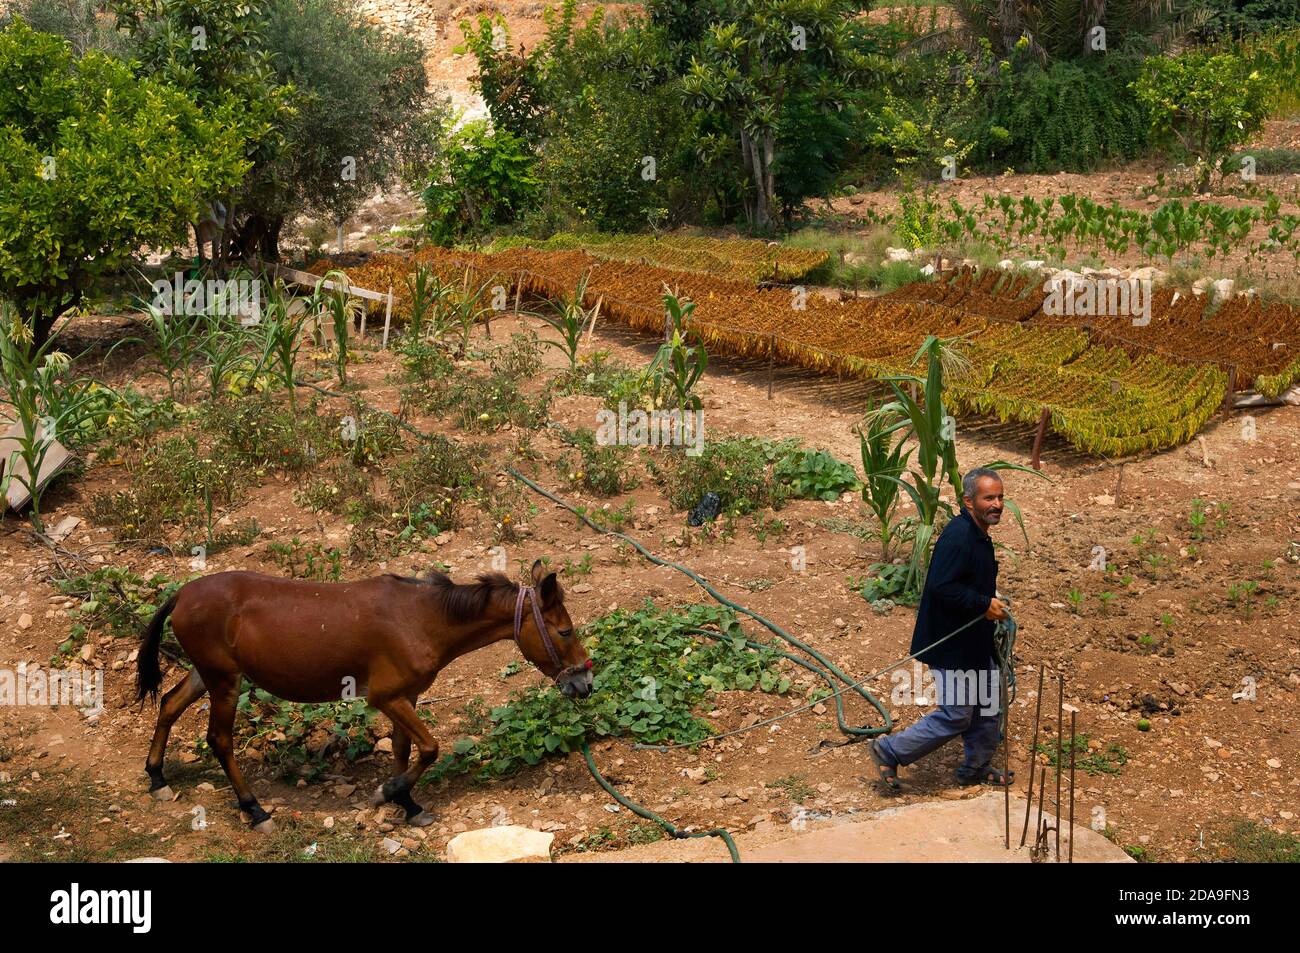 Tyre, Lebanon. 16th July, 2010. A Lebanese farmer leads his horse through  his tobacco field.Tobacco farming is a primary source of income in the  South of Lebanon; the work is fraught with